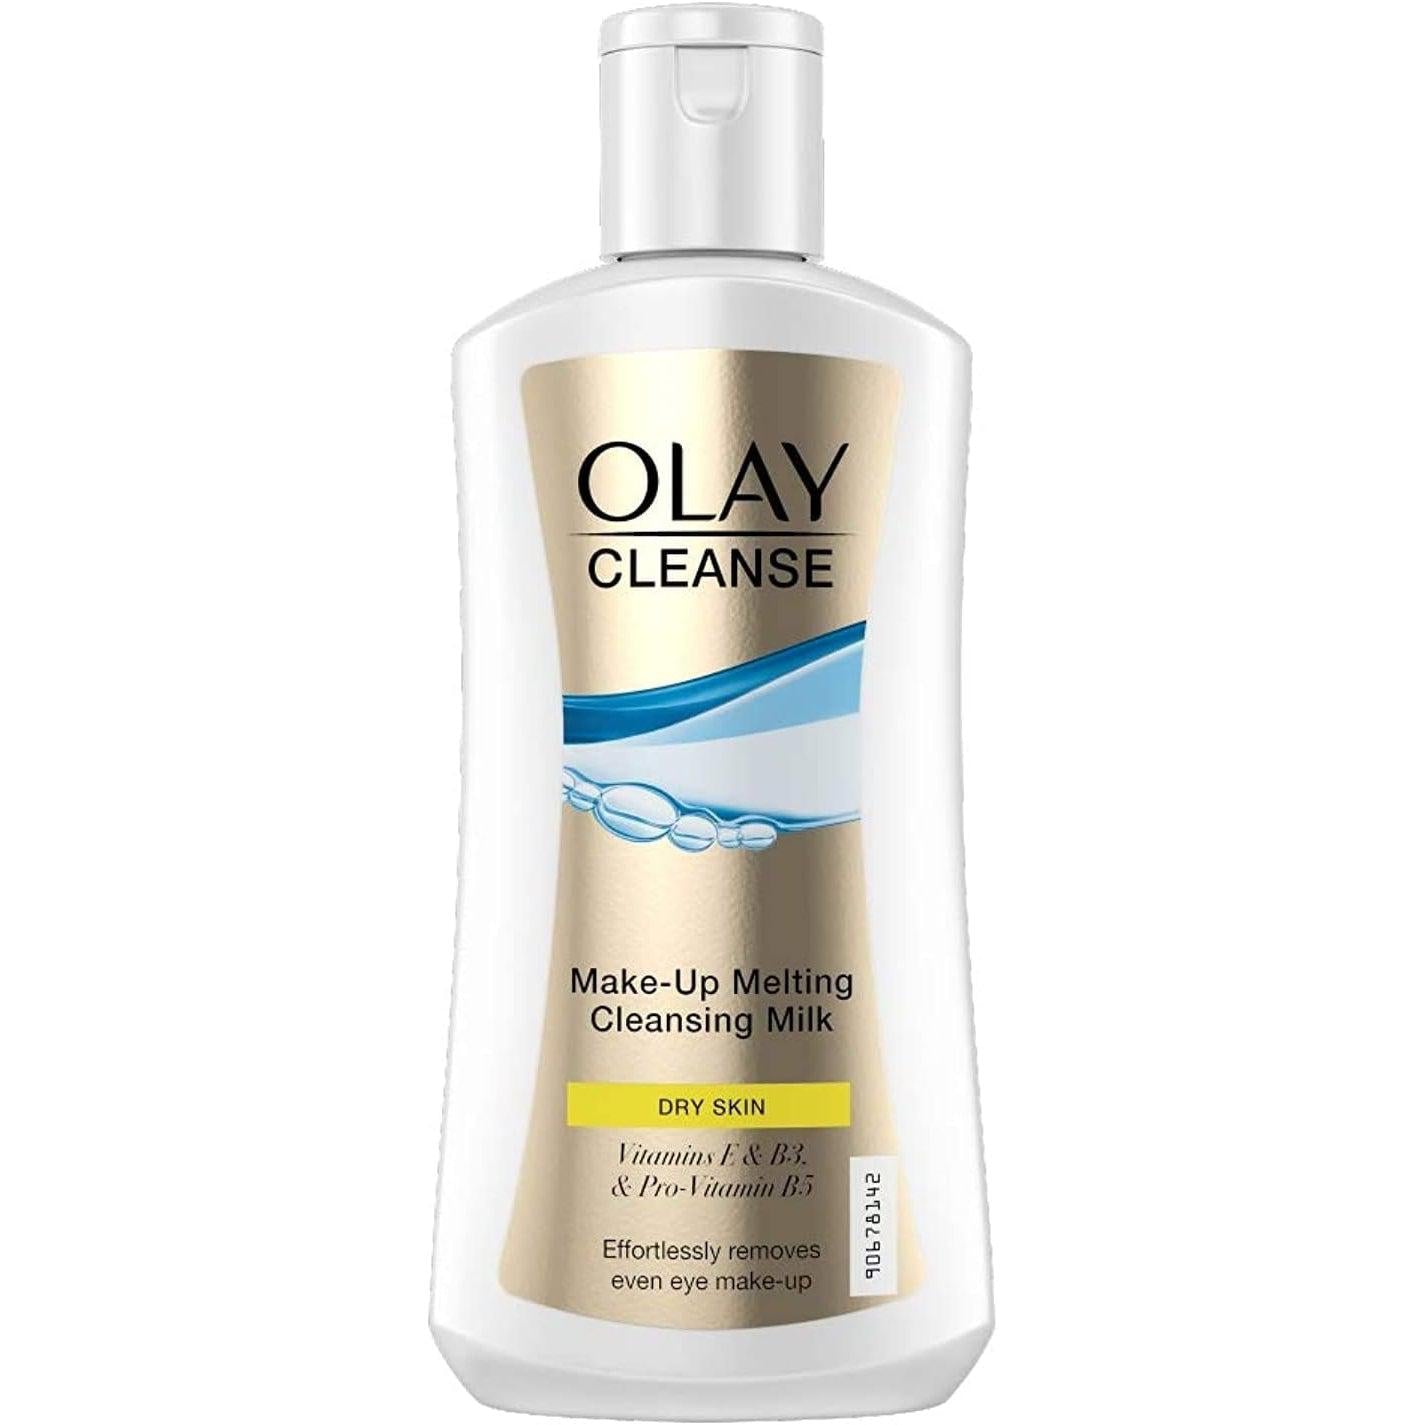 Olay Cleanse Make-Up Melting Cleansing Milk Dry Skin, 200 ml - Healthxpress.ie